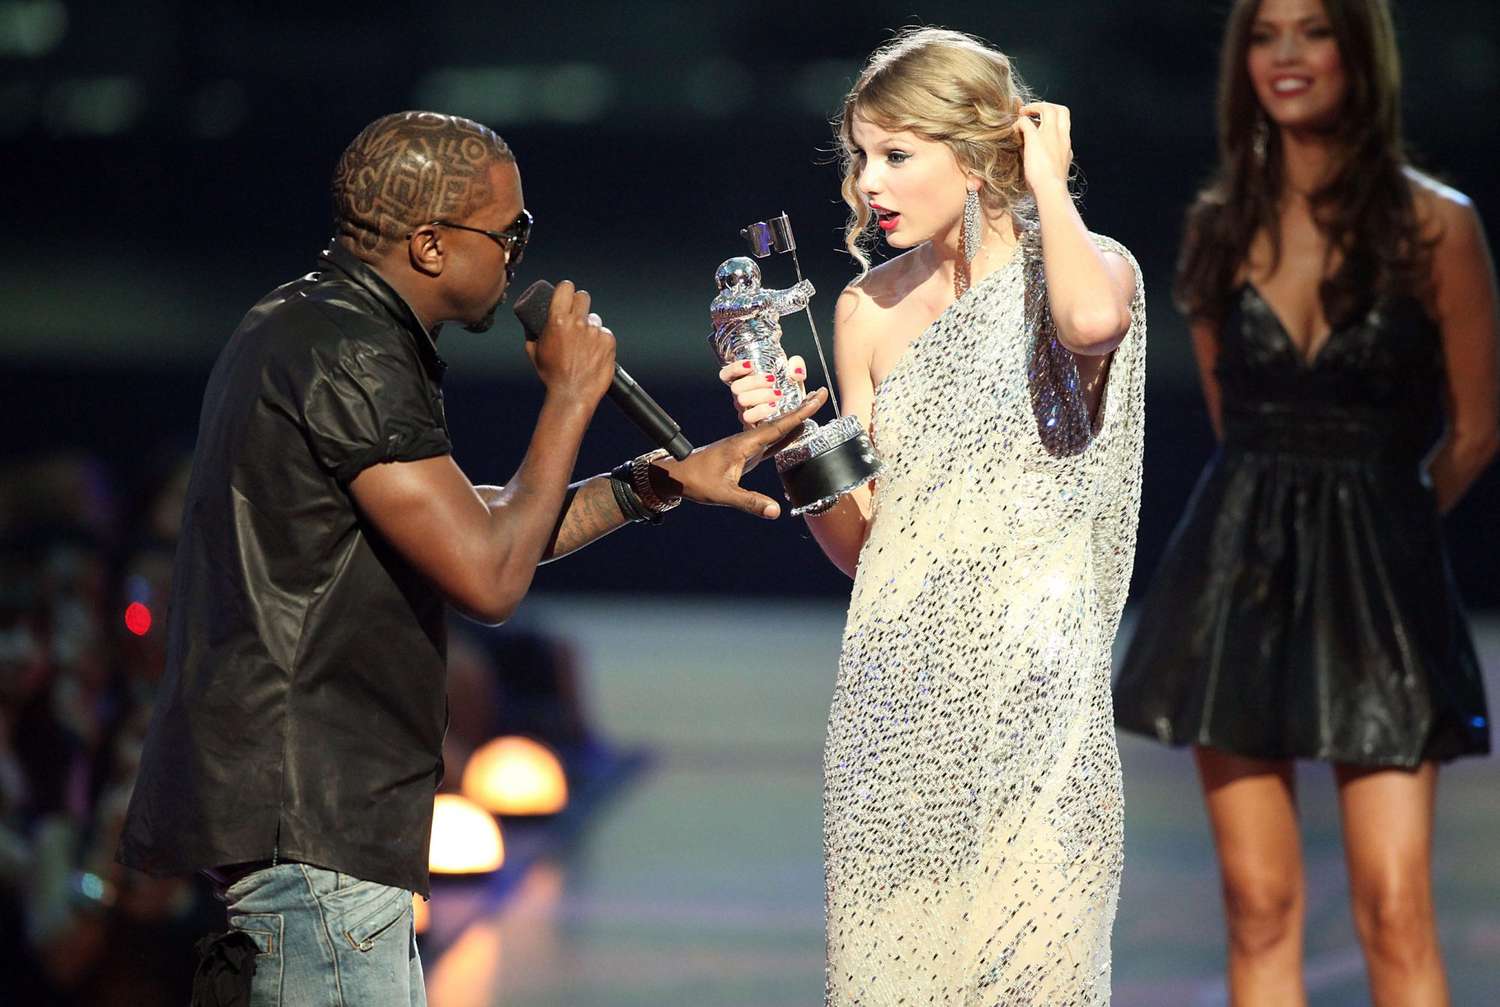 The beginning of the feud between Taylor Swift and Kanye West, at the 2009 Grammys. 